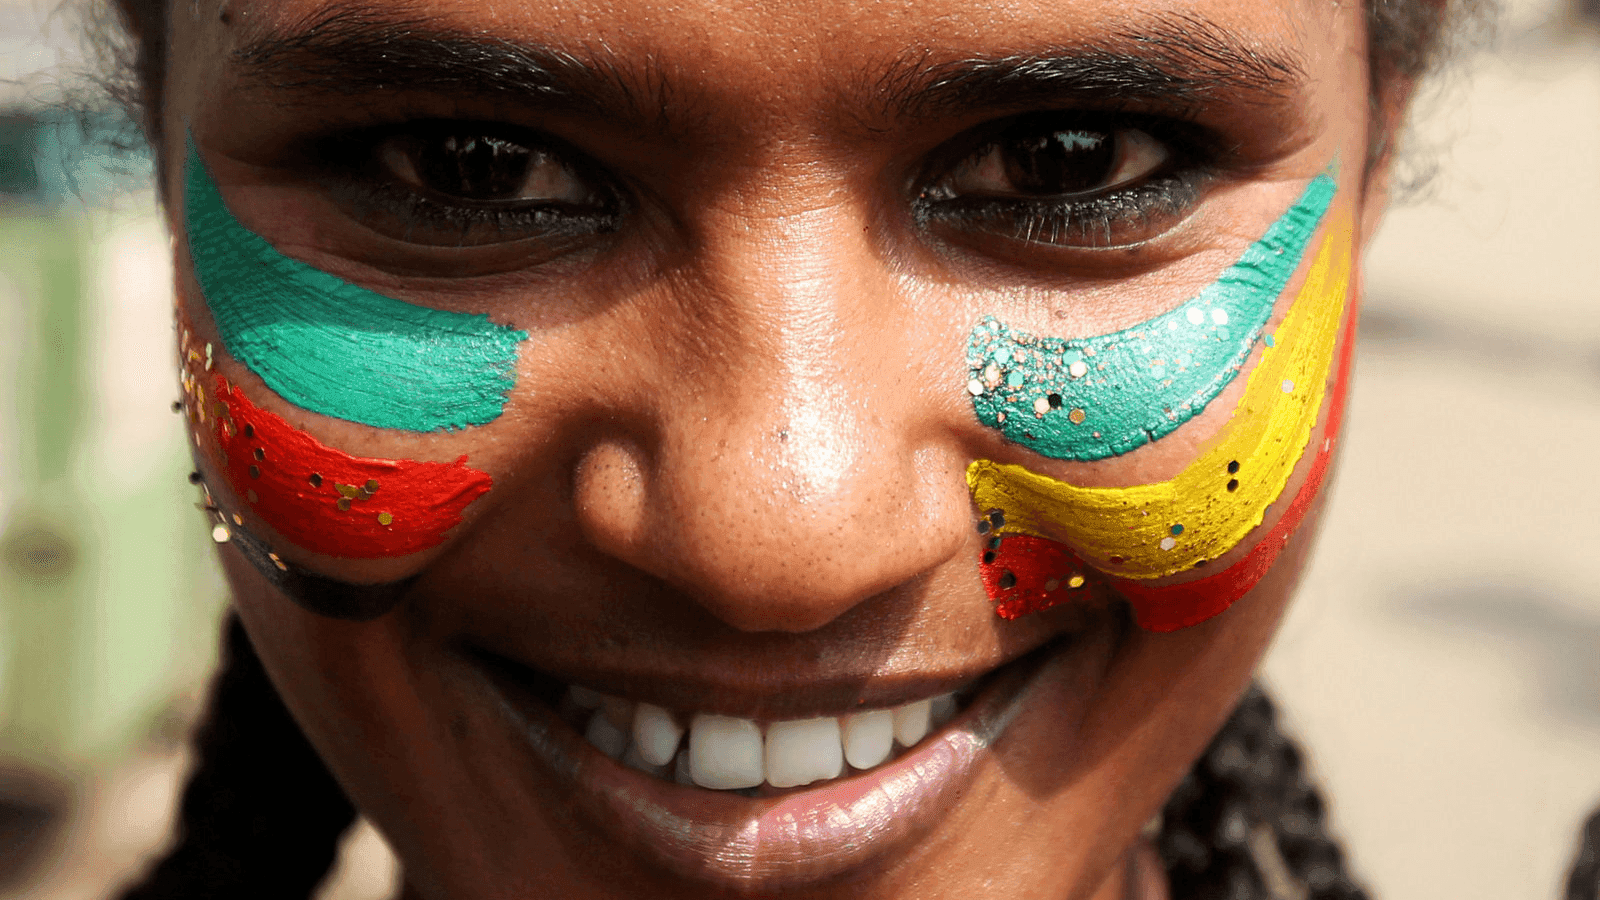 a woman's face painted with ethiopian and eritrean flags